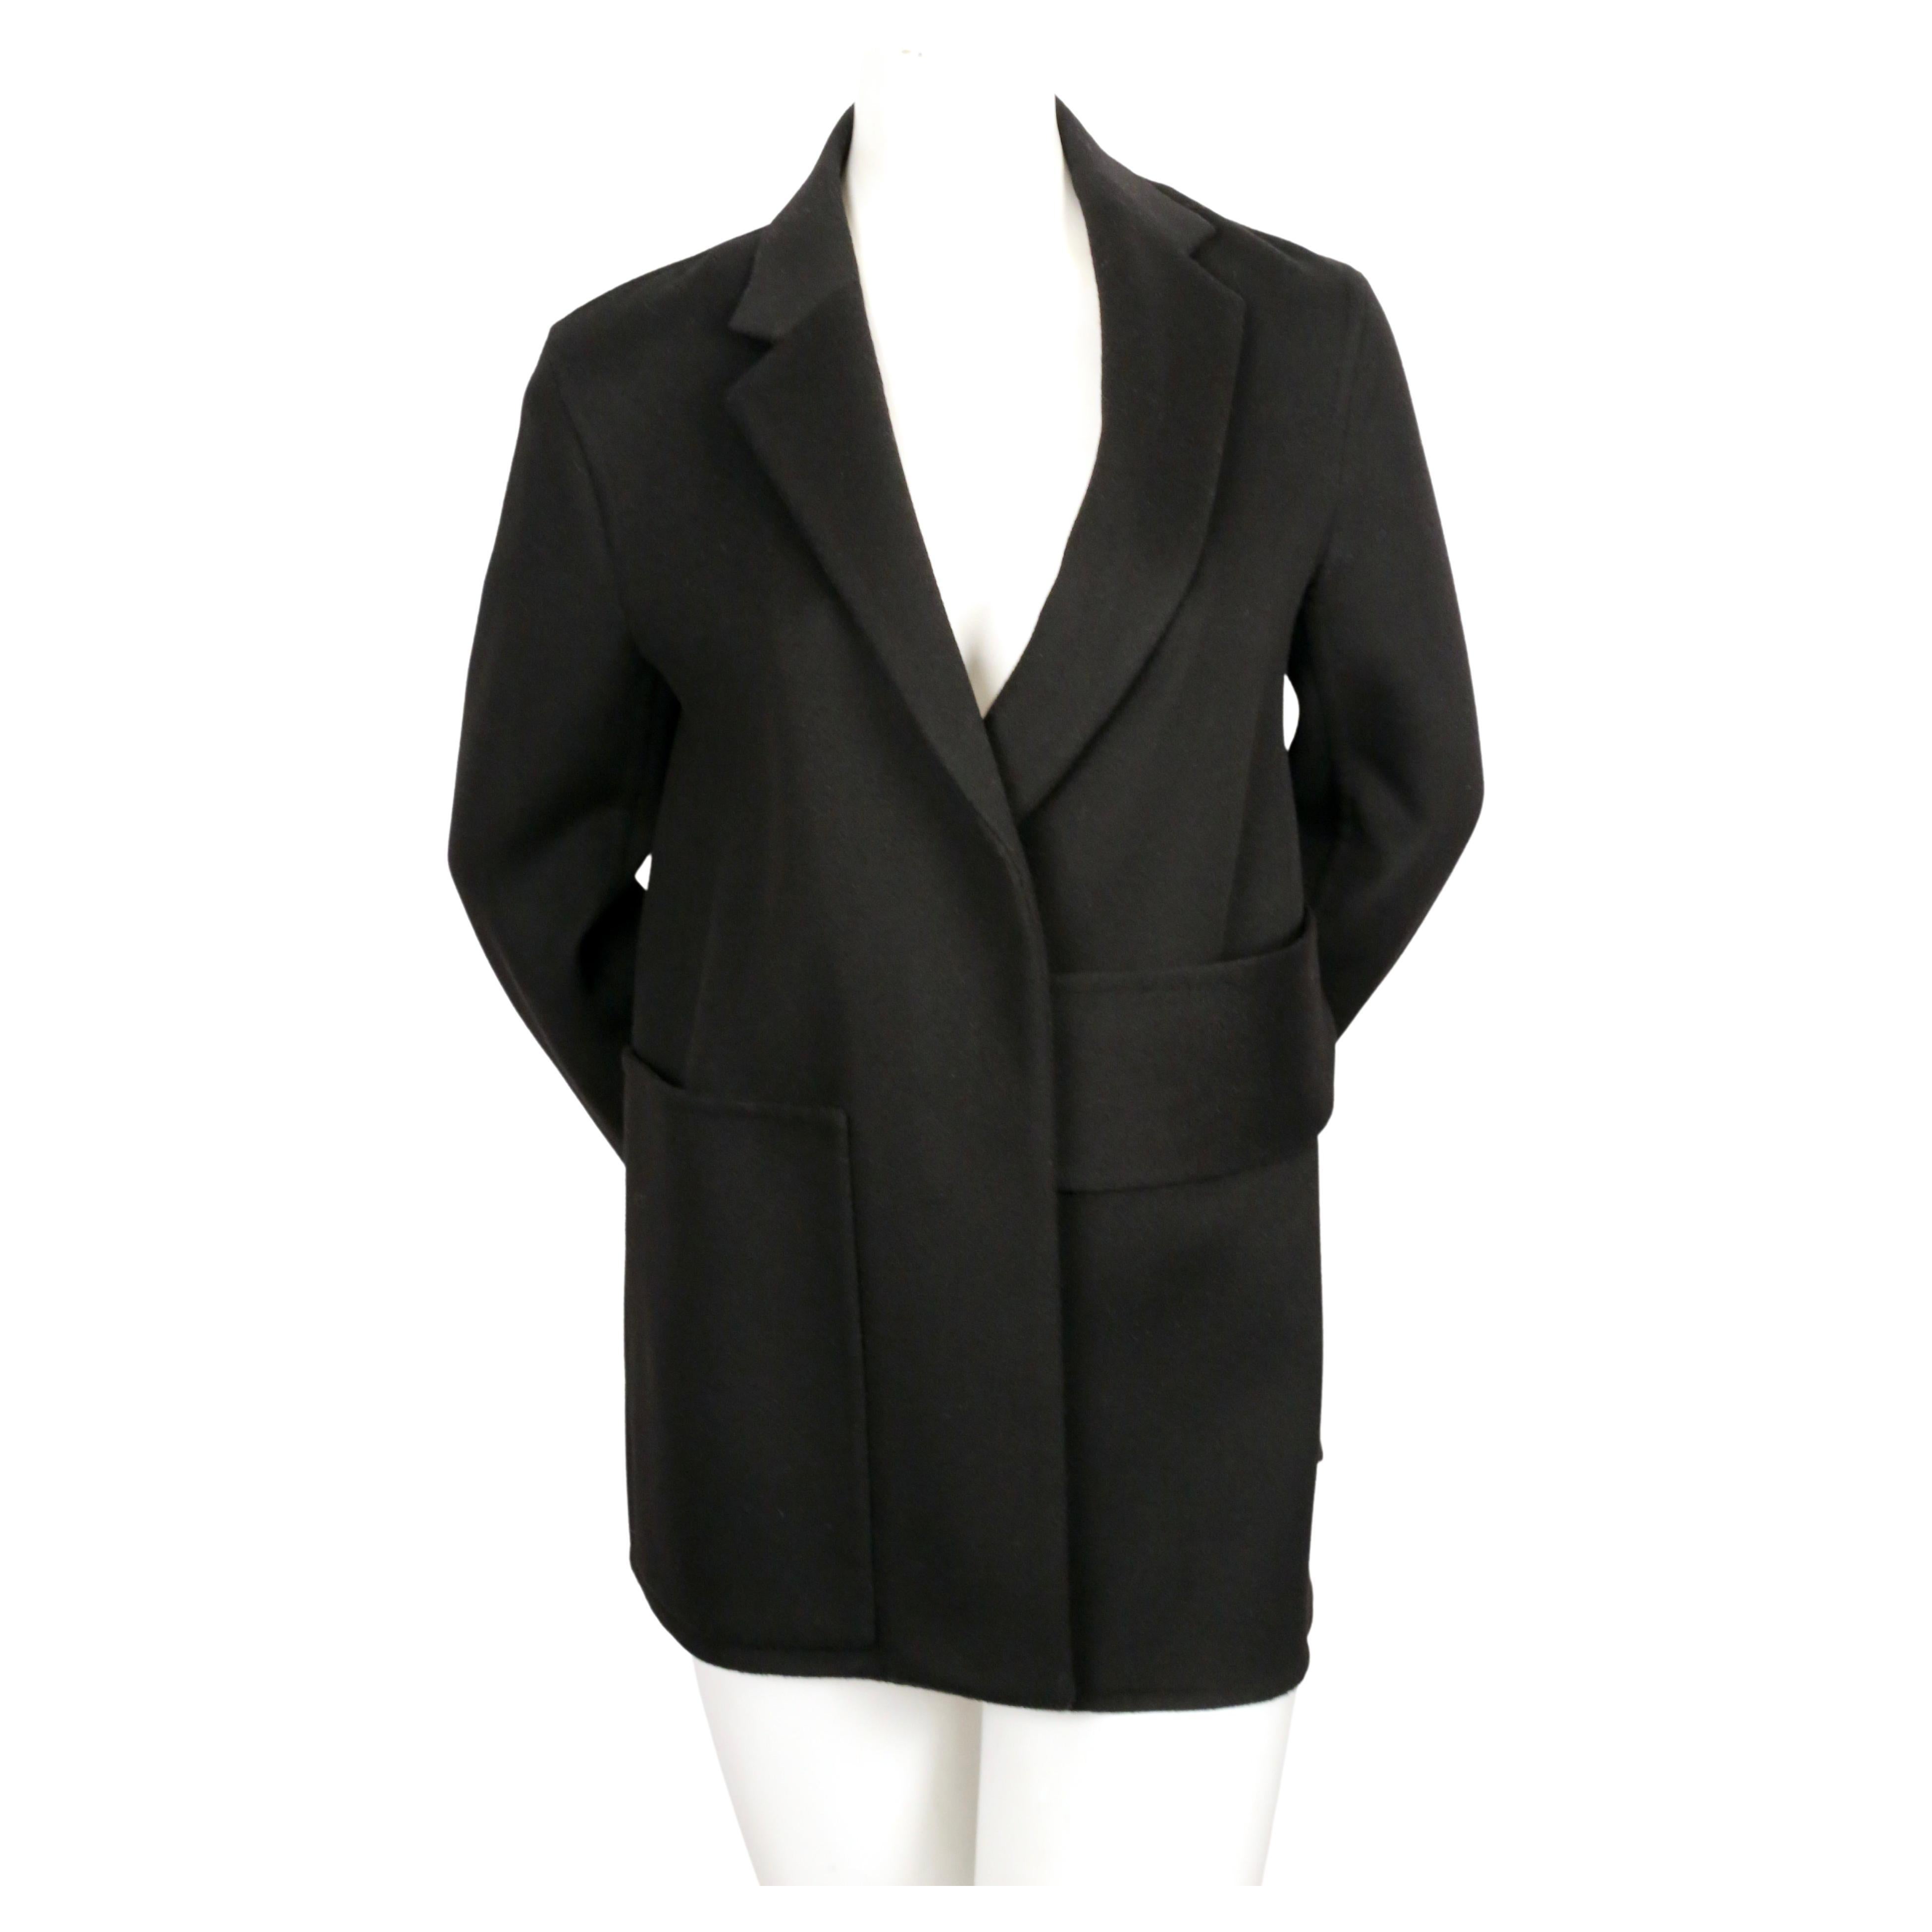 CELINE by PHOEBE PHILO black wool and cashmere jacket with asymmetrical ...